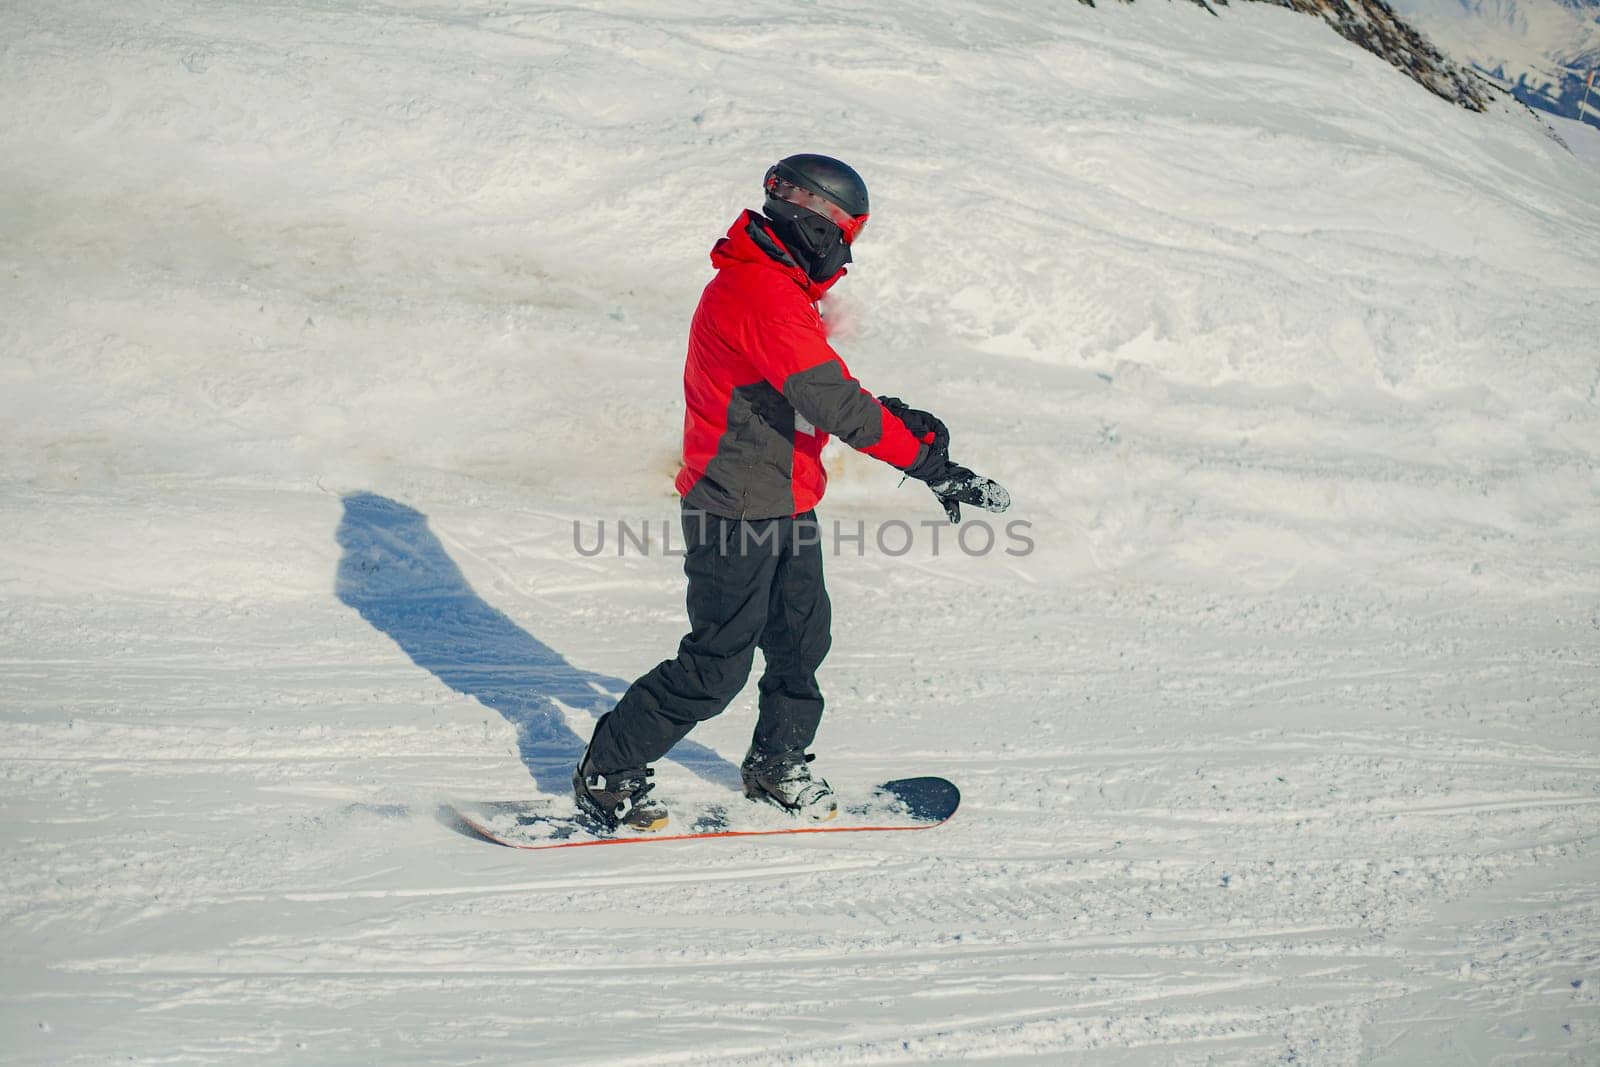 A snowboarder rides on a slope. Rest on the top of the mountain. Mountain ski resort. by OlegKopyov